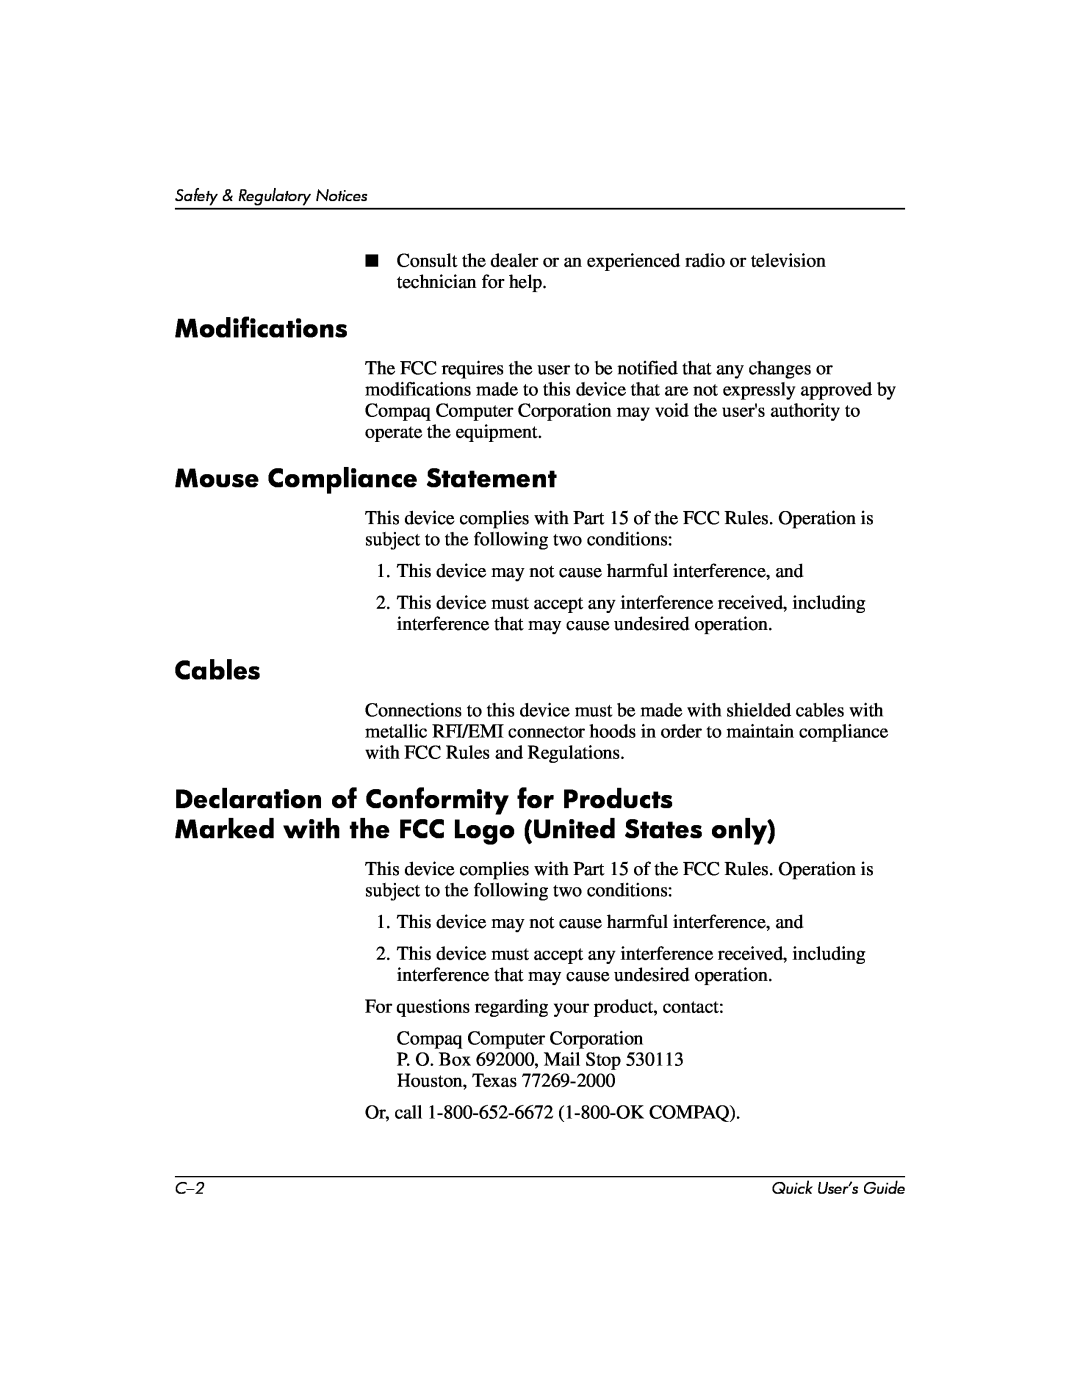 Compaq D510 e-pc manual Modifications, Mouse Compliance Statement, Cables, Safety & Regulatory Notices 